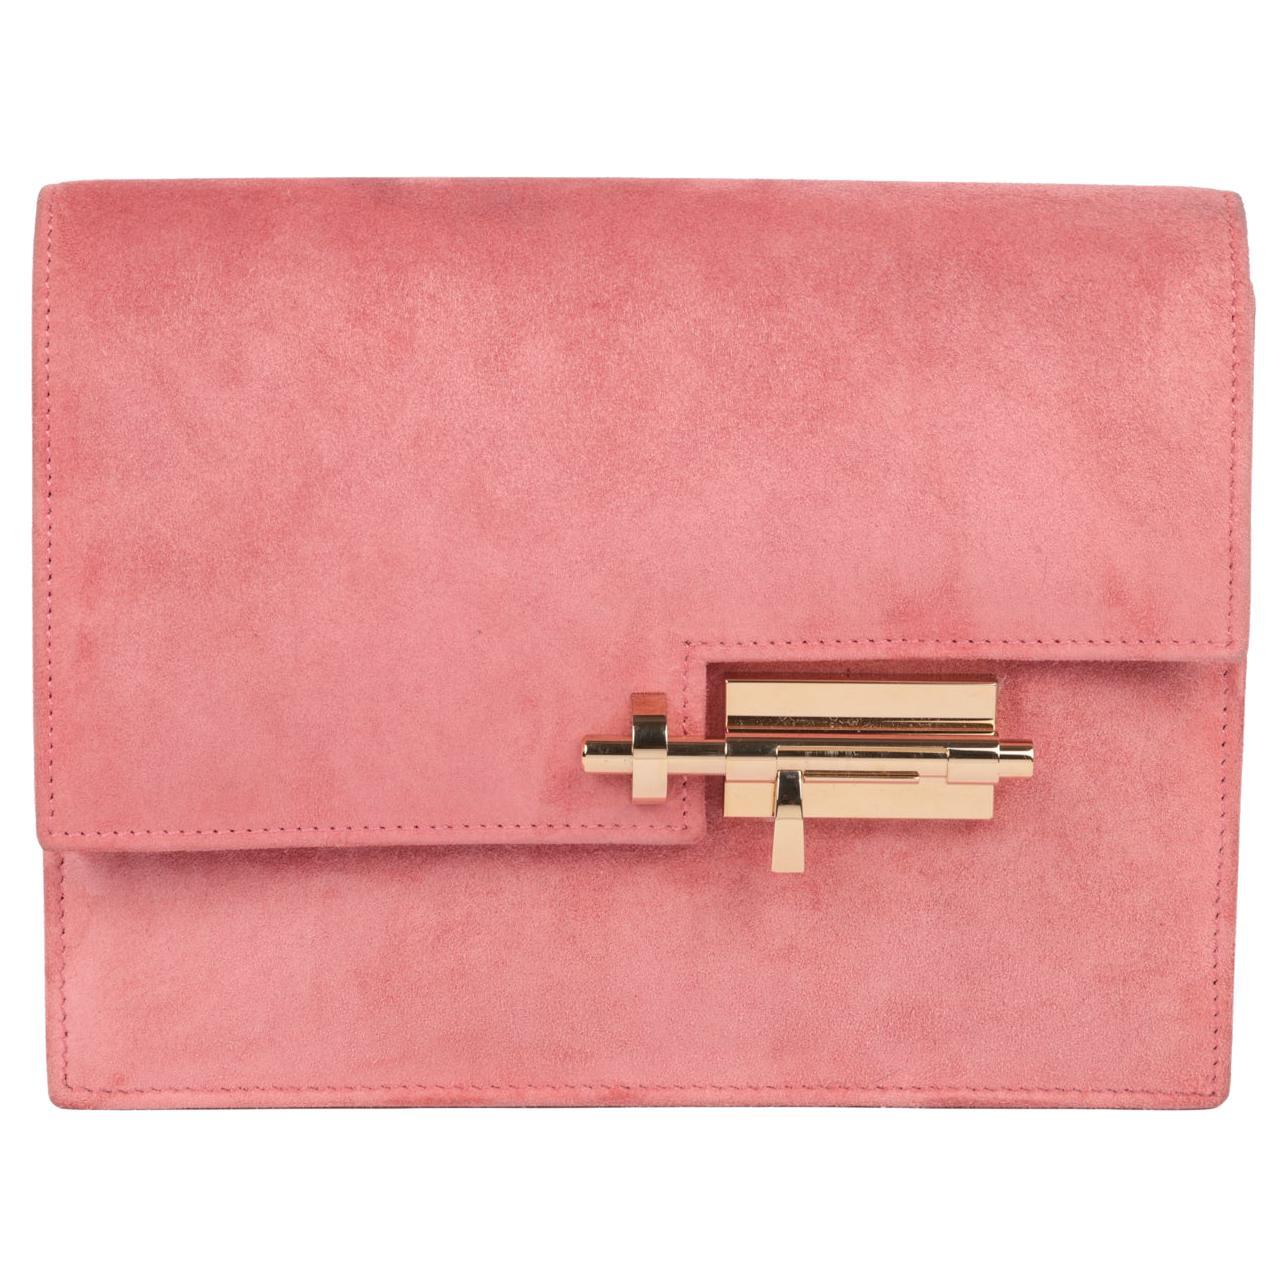 Hermes Kelly Cut Clutch Pochette in Ocre Veau Dublis Suede with